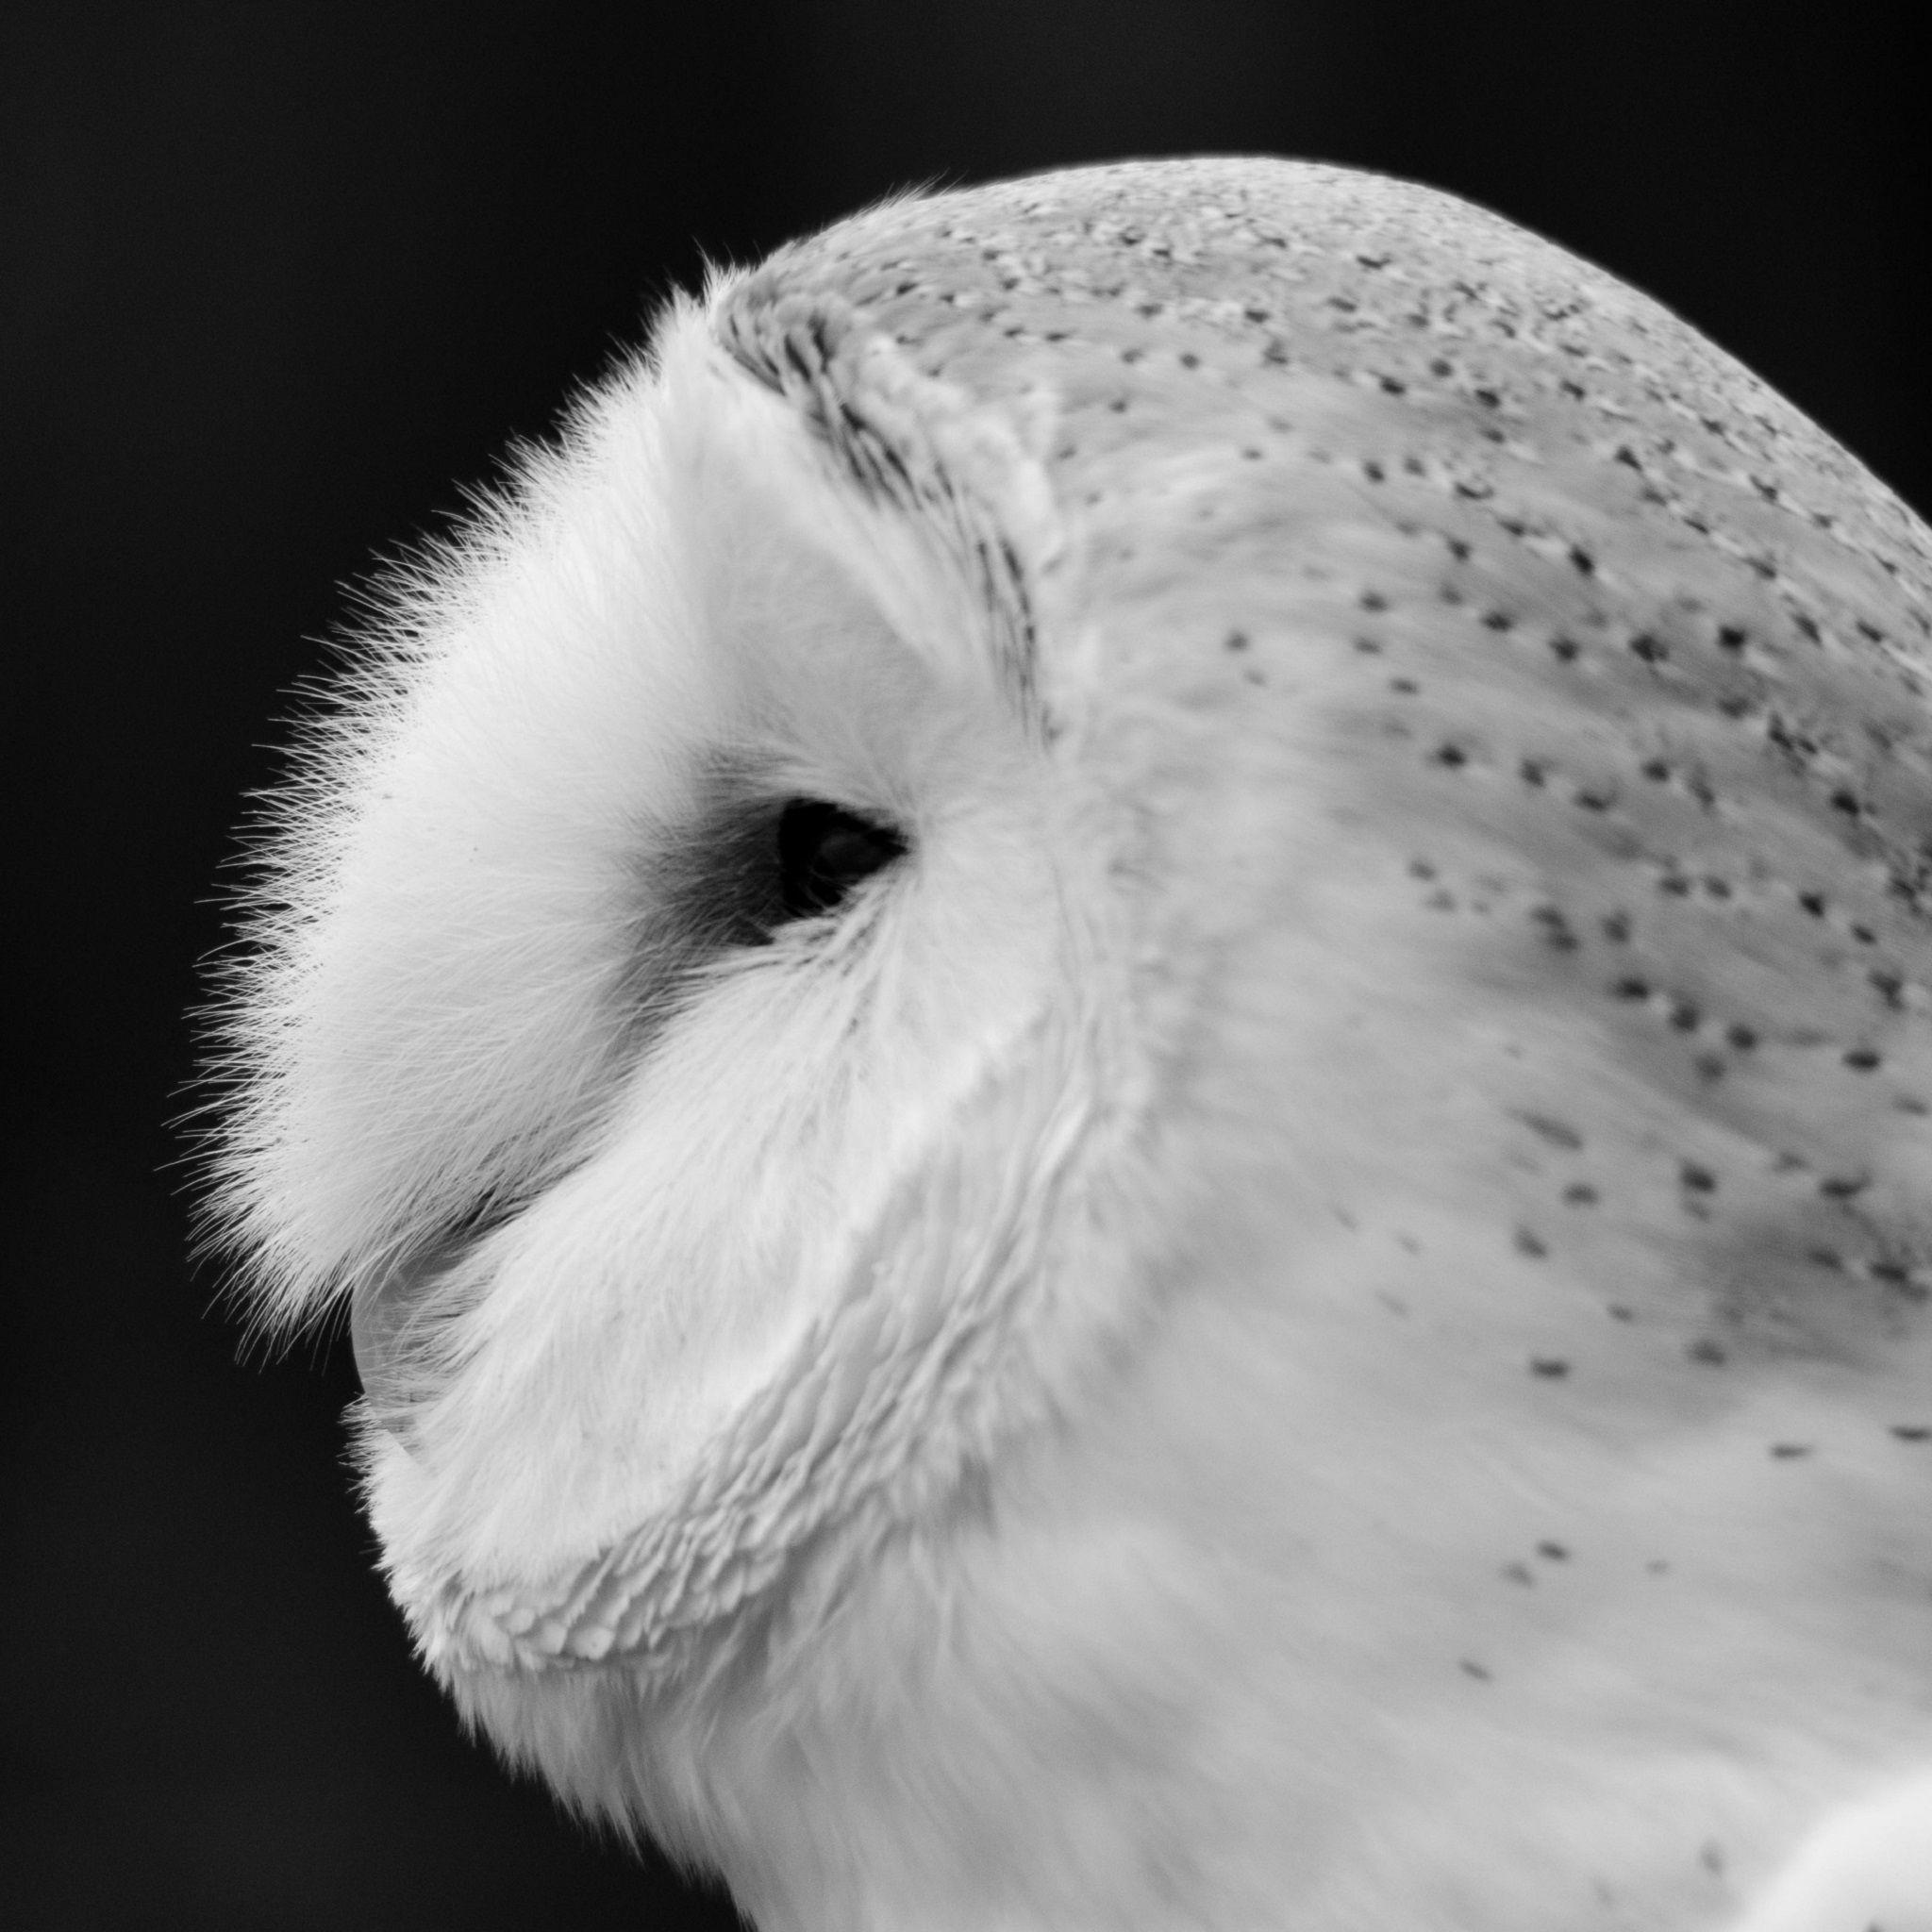 Barn Owl to see more best #blackwhite #photography wallpaper